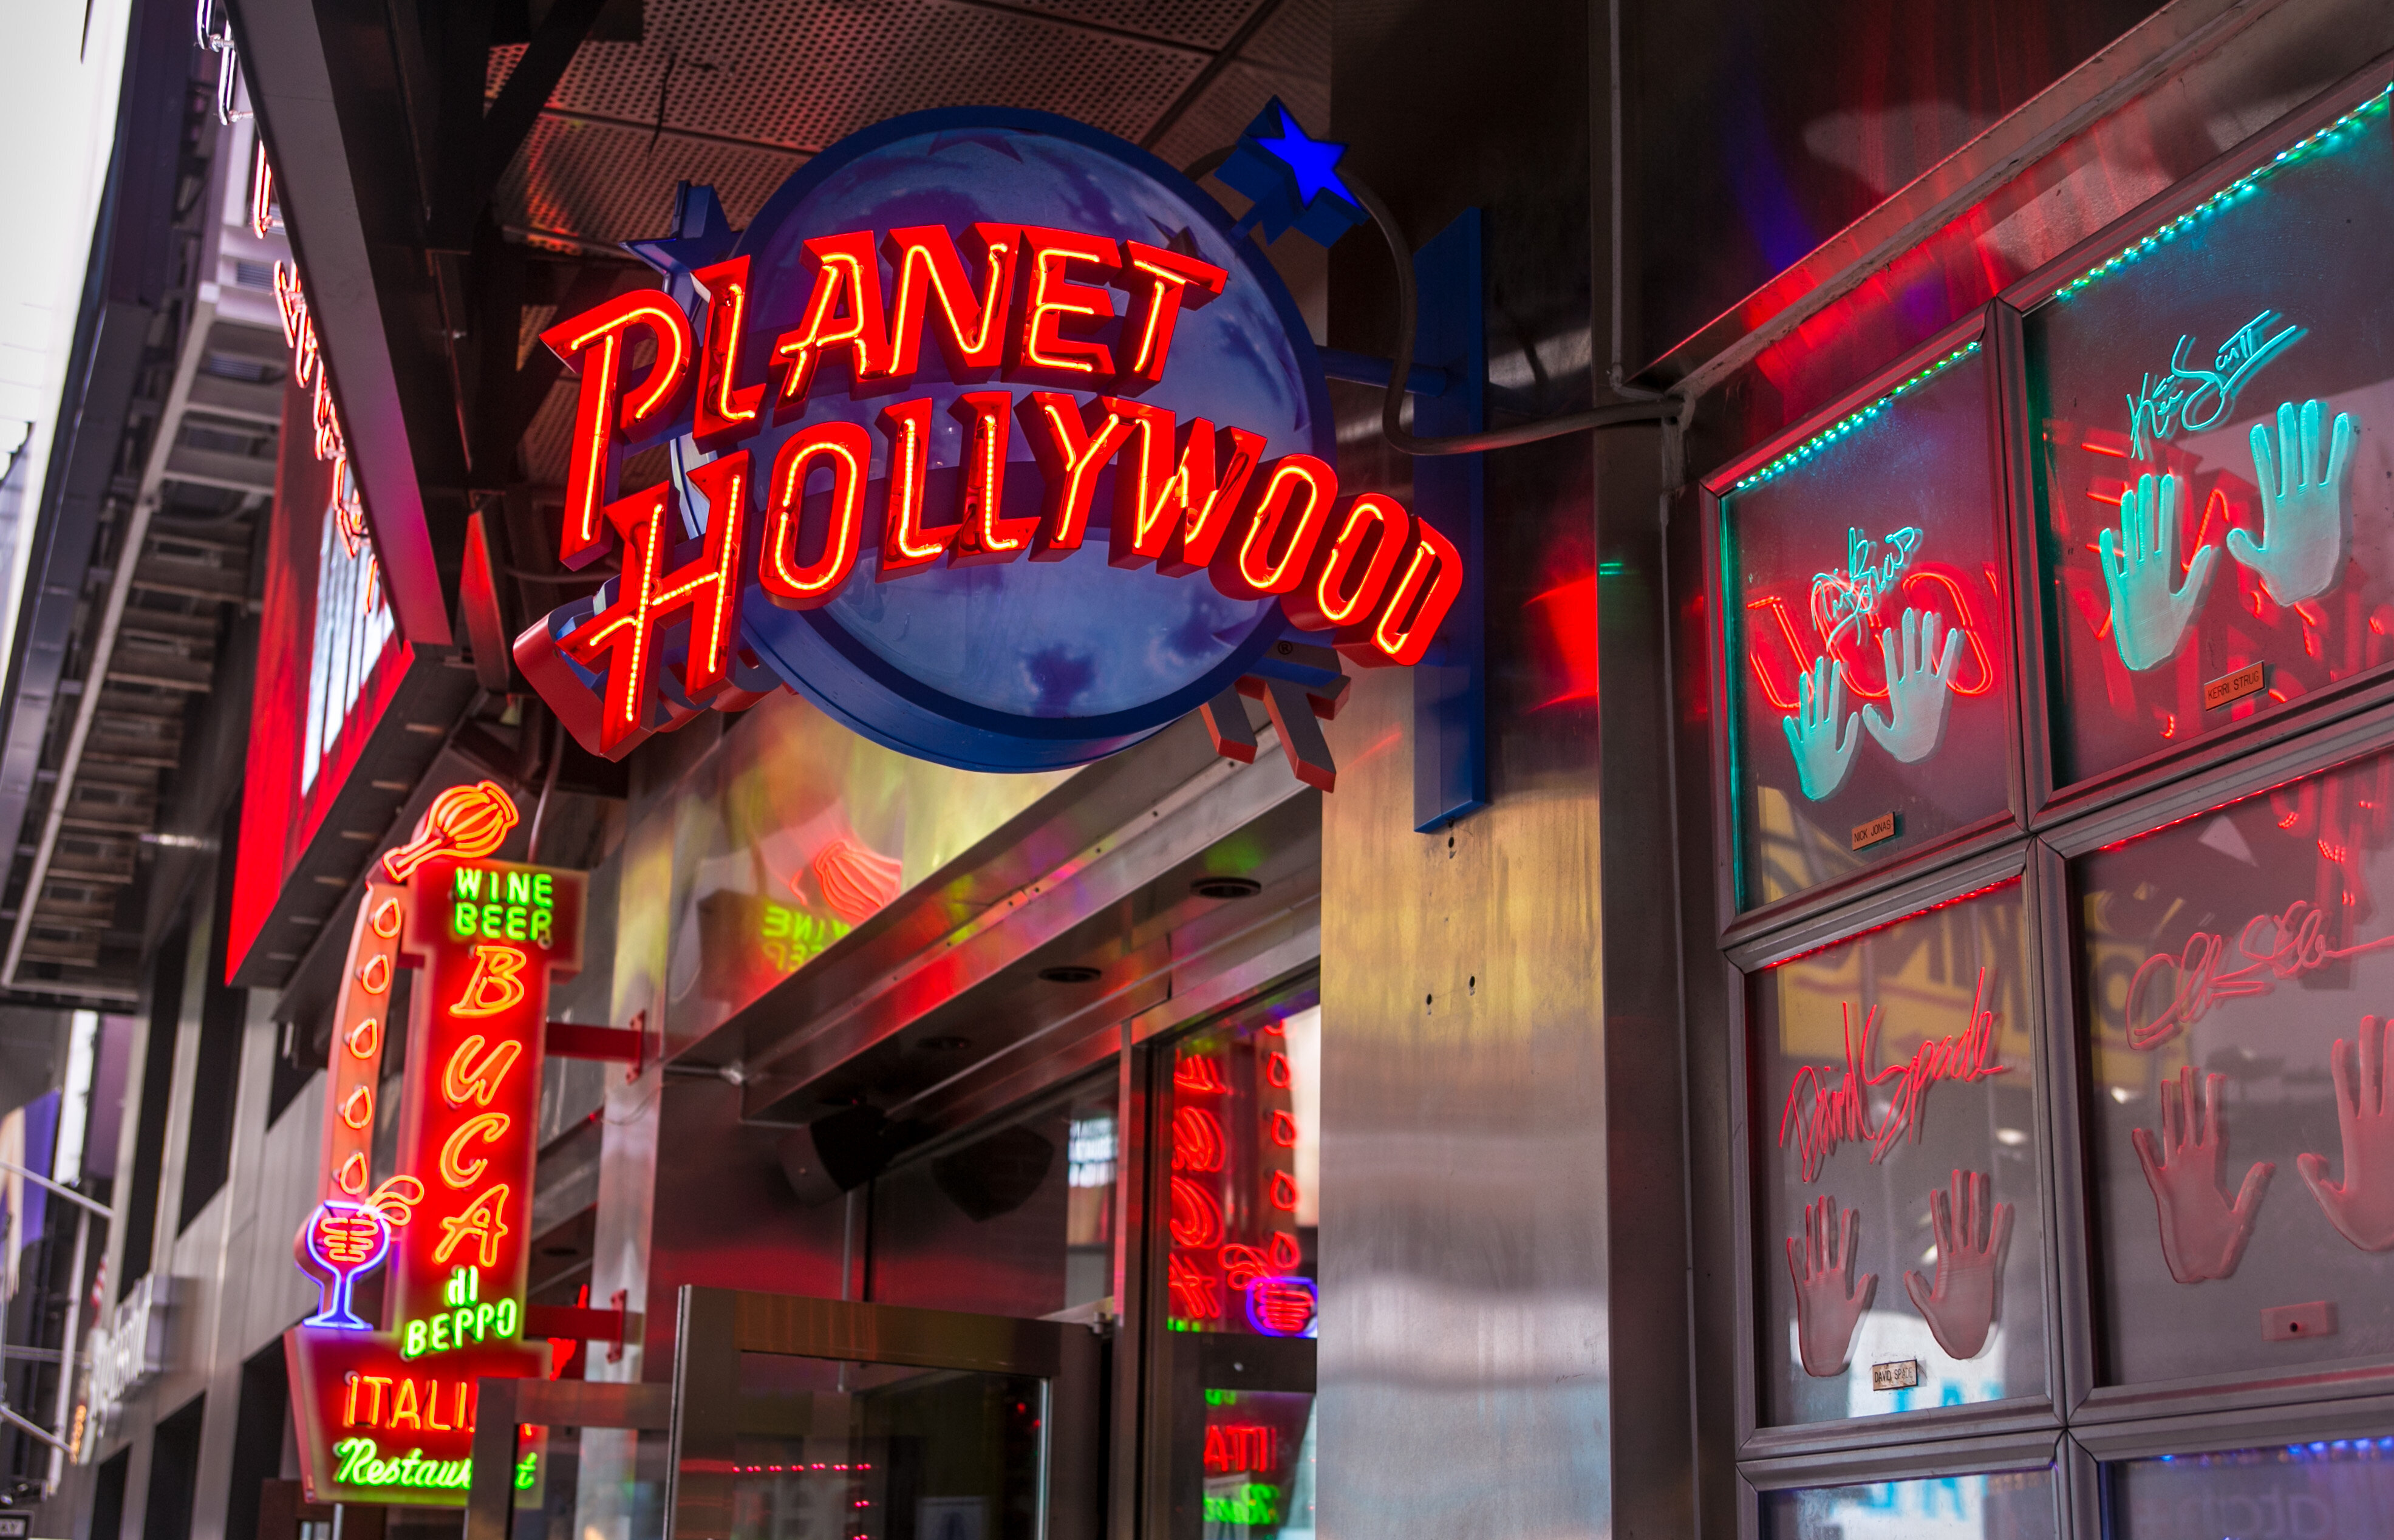 Bright neon signs outside Planet Hollywood and nearby establishments, featuring vivid handprints and text, creating a vibrant nightlife ambiance